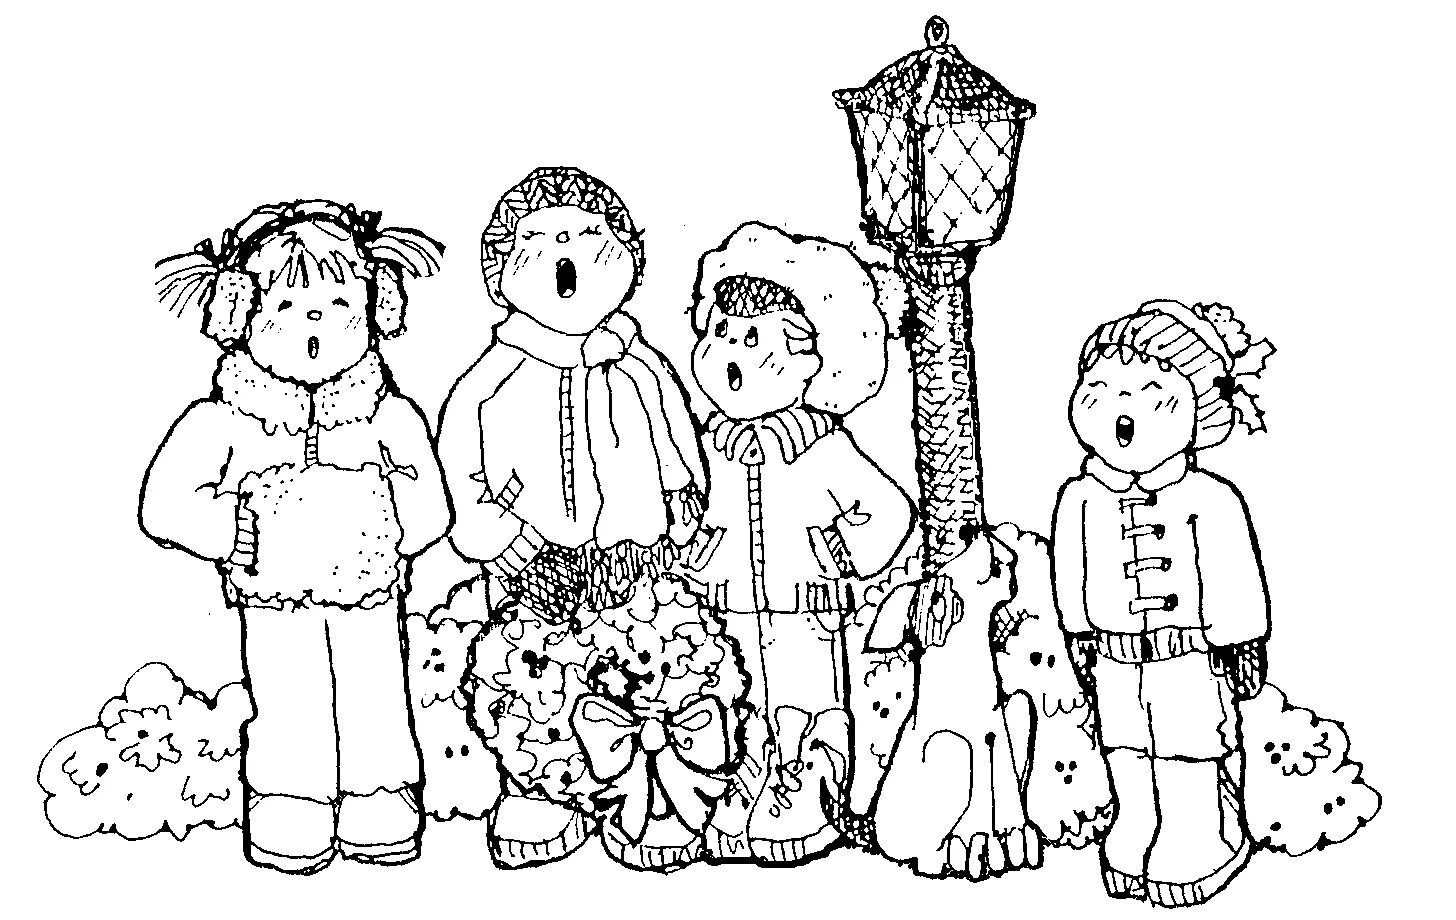 Crazy Carol coloring pages for 6-7 year olds